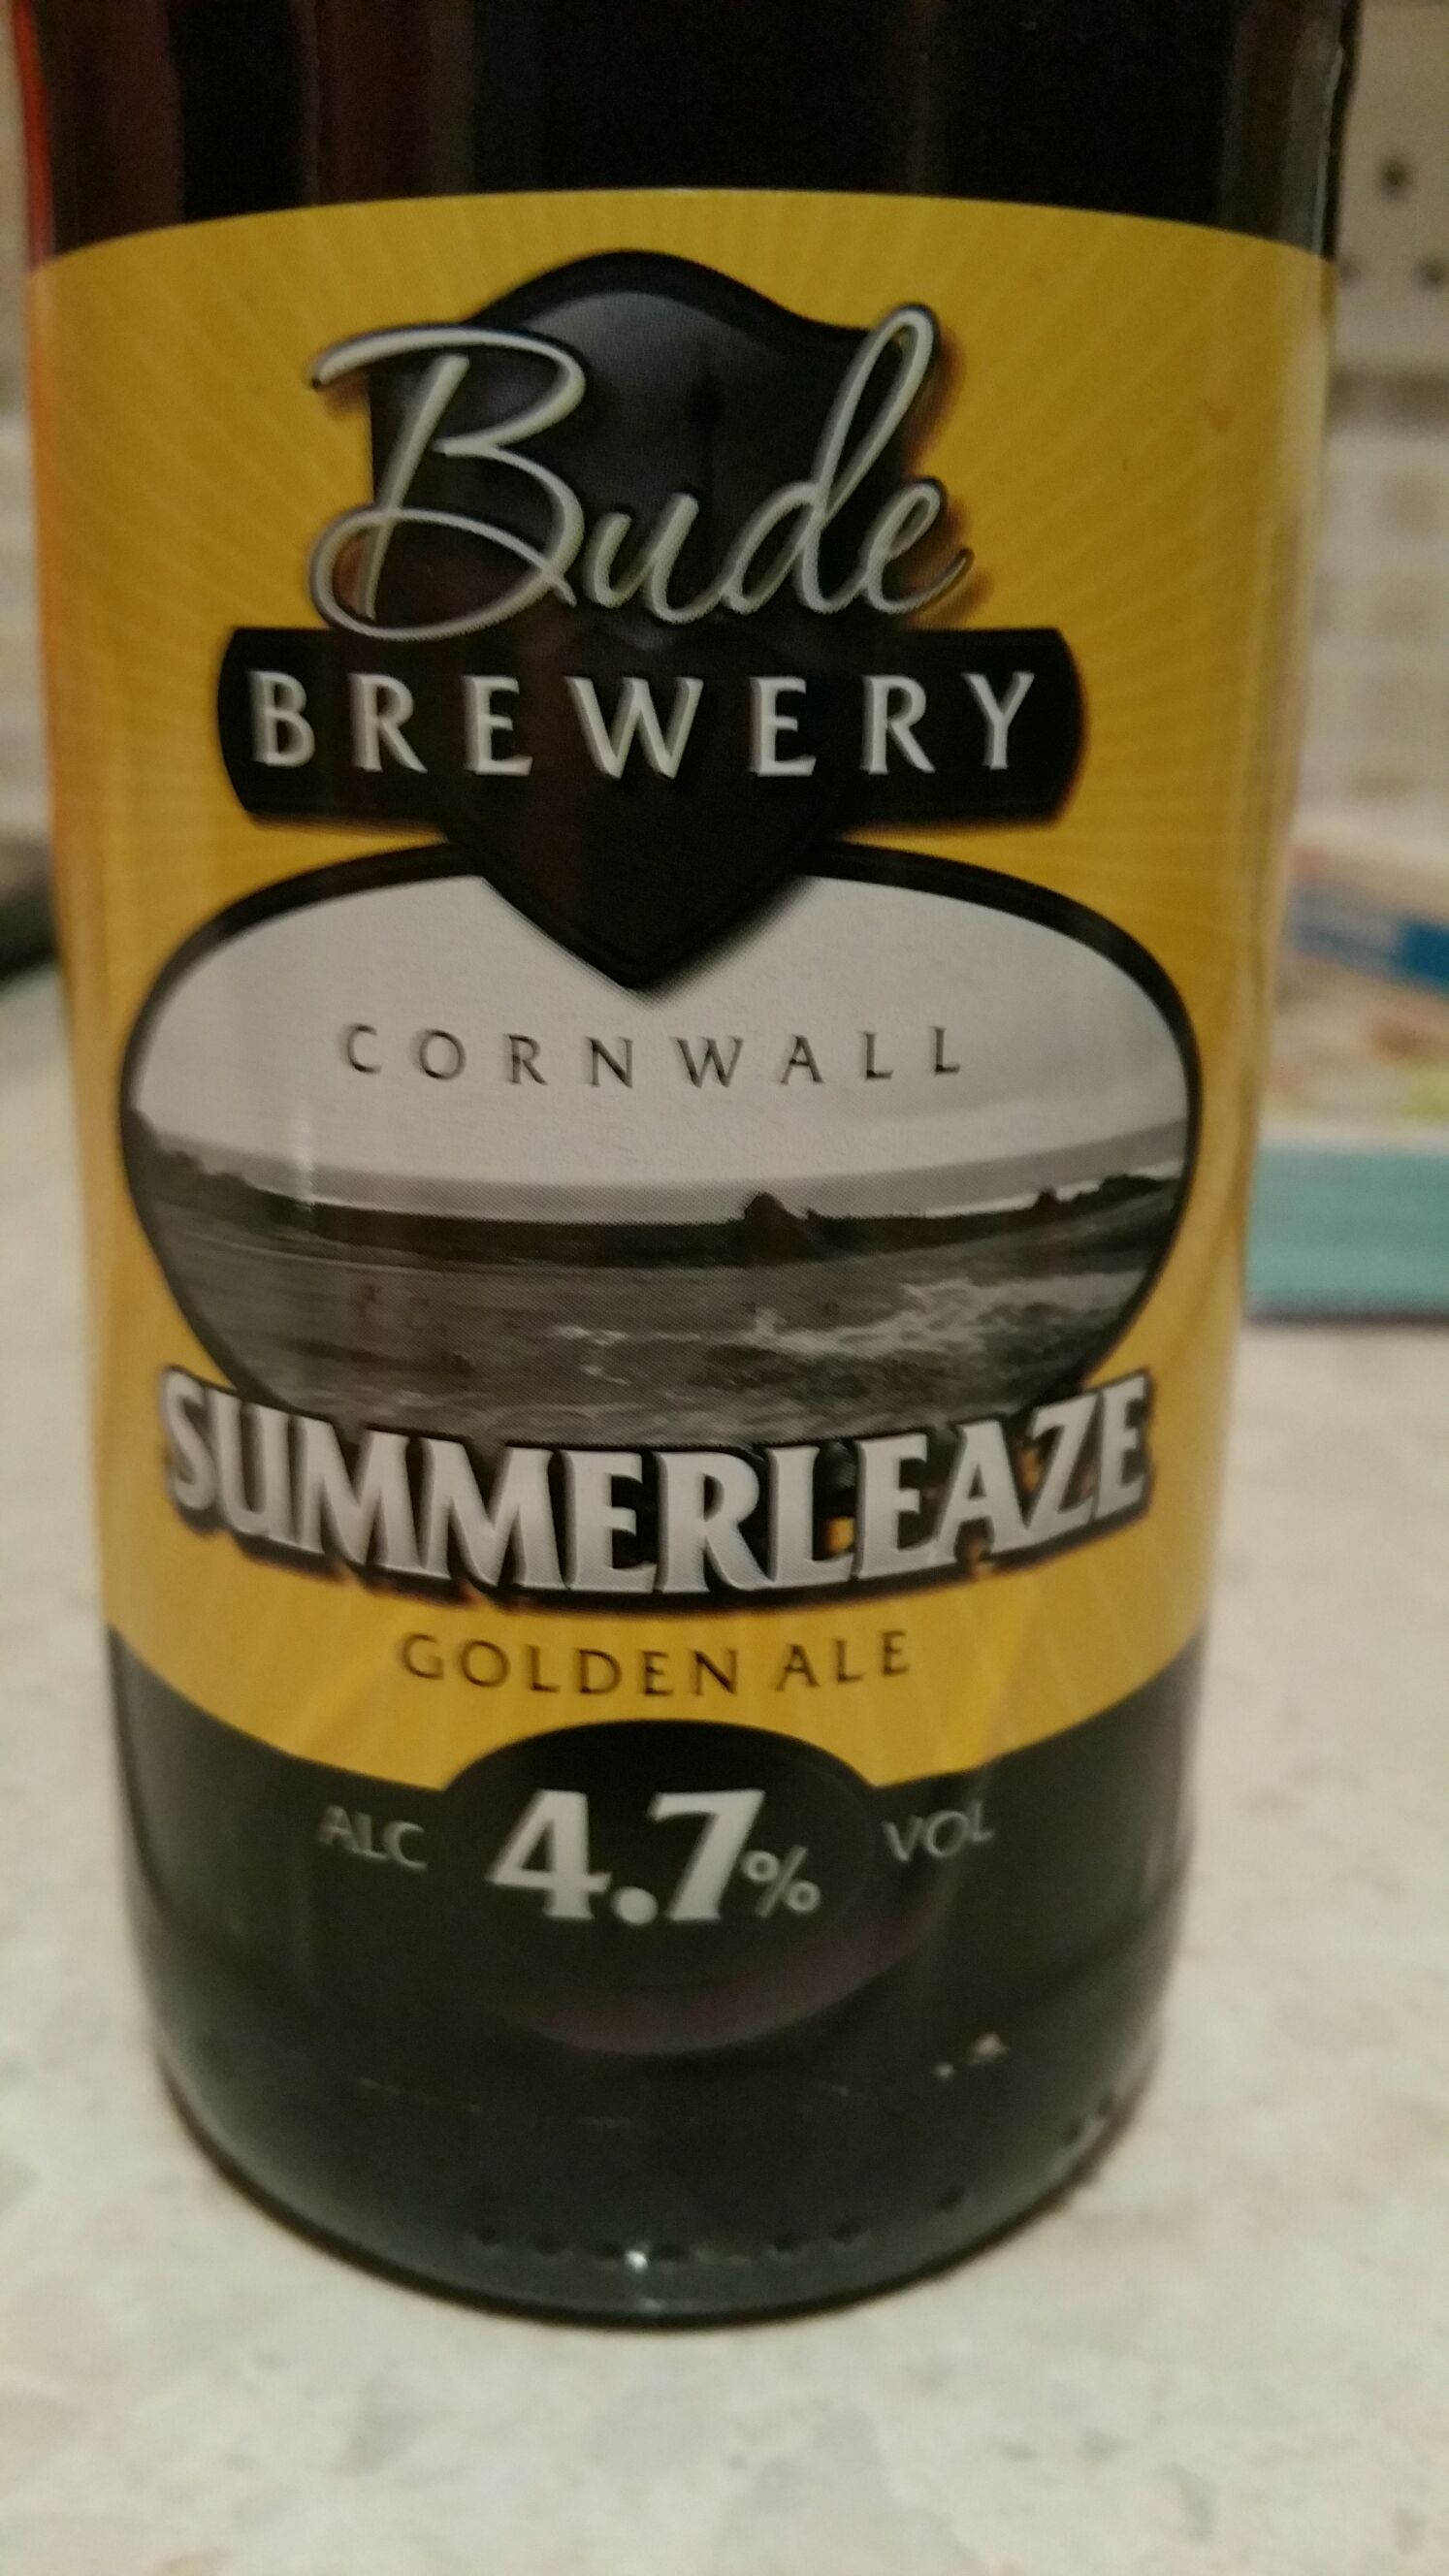 Summerleaze - Bude Brewery alcohol collectible - Main Image 1